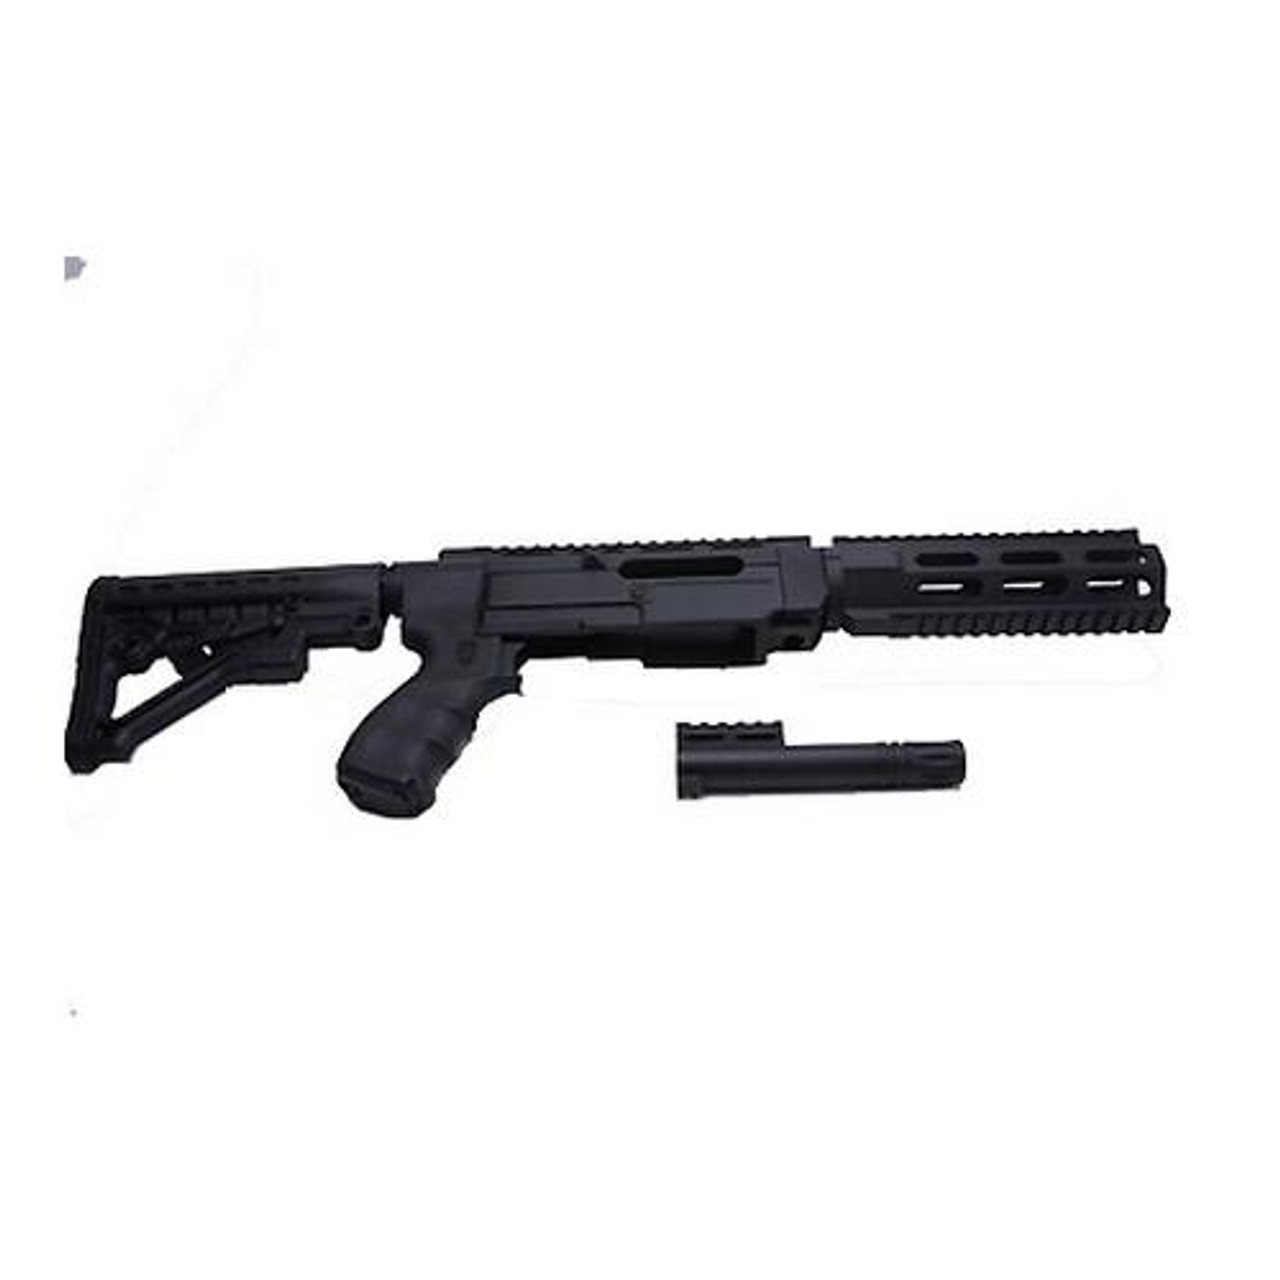 Promag Aa556rnb Archangel Conversion Stock Black Synthetic Ruger 10 22